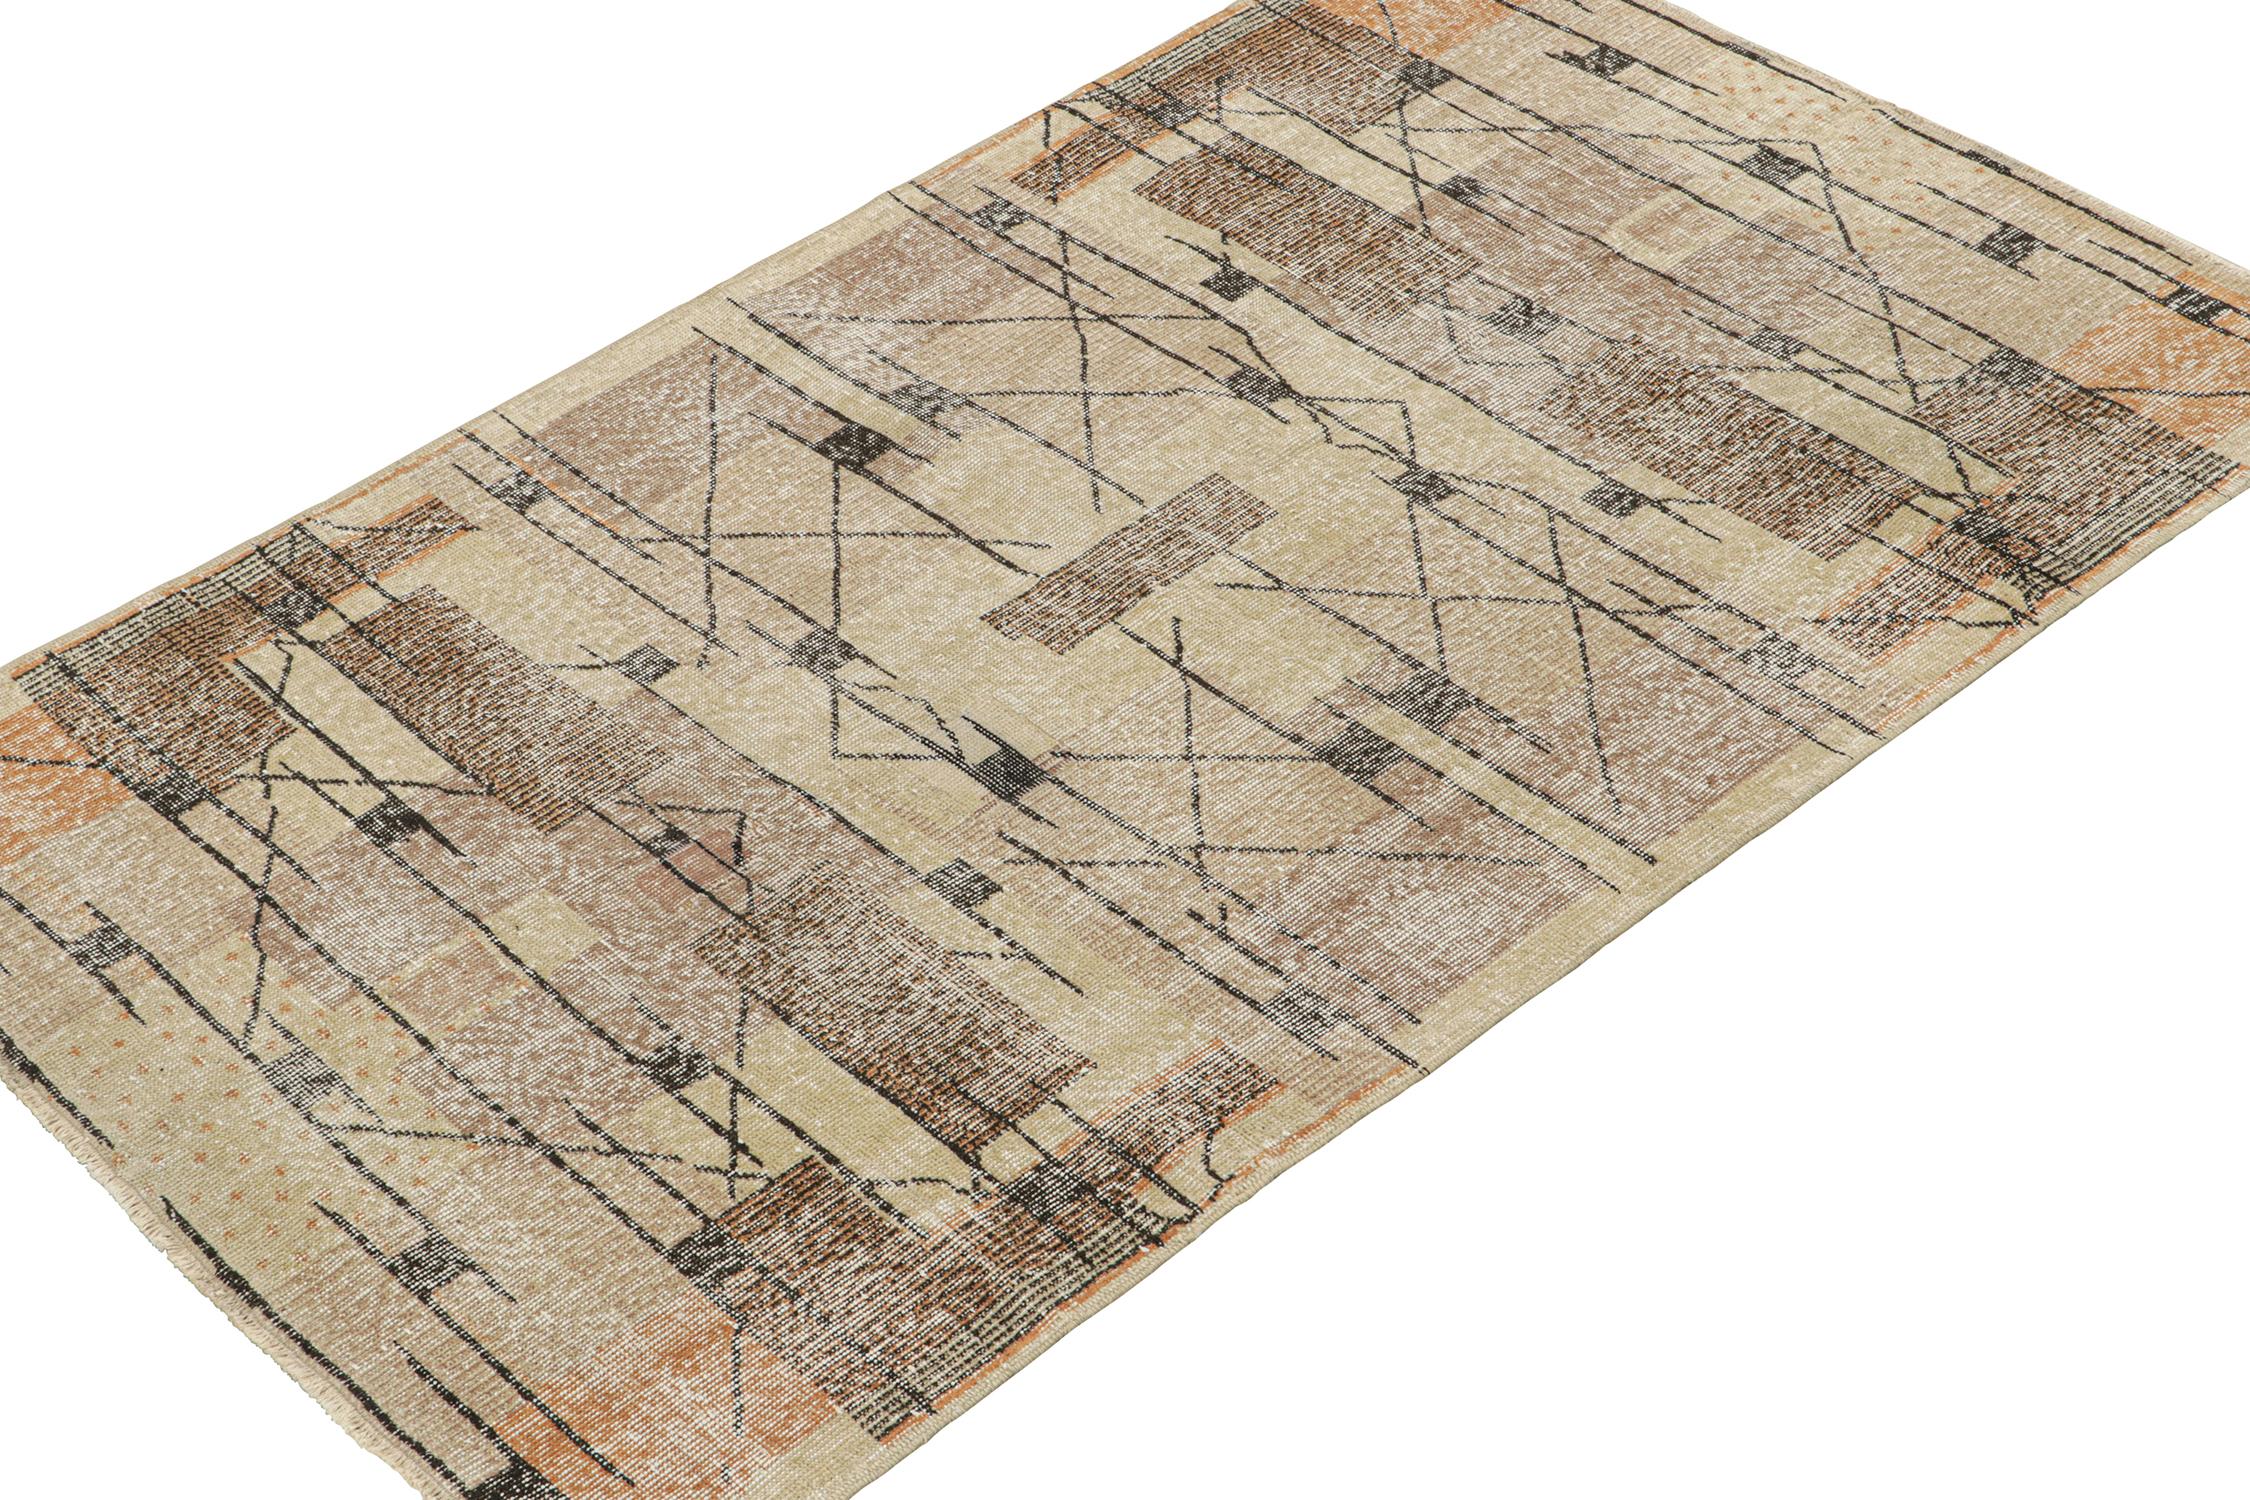 This vintage rug is an exciting new addition to Rug & Kilim’s Mid-Century Pasha Collection. This line is a commemoration, with rare curations we believe to hail from multidisciplinary Turkish designer Zeki Müren. 

Further on the Design: 
